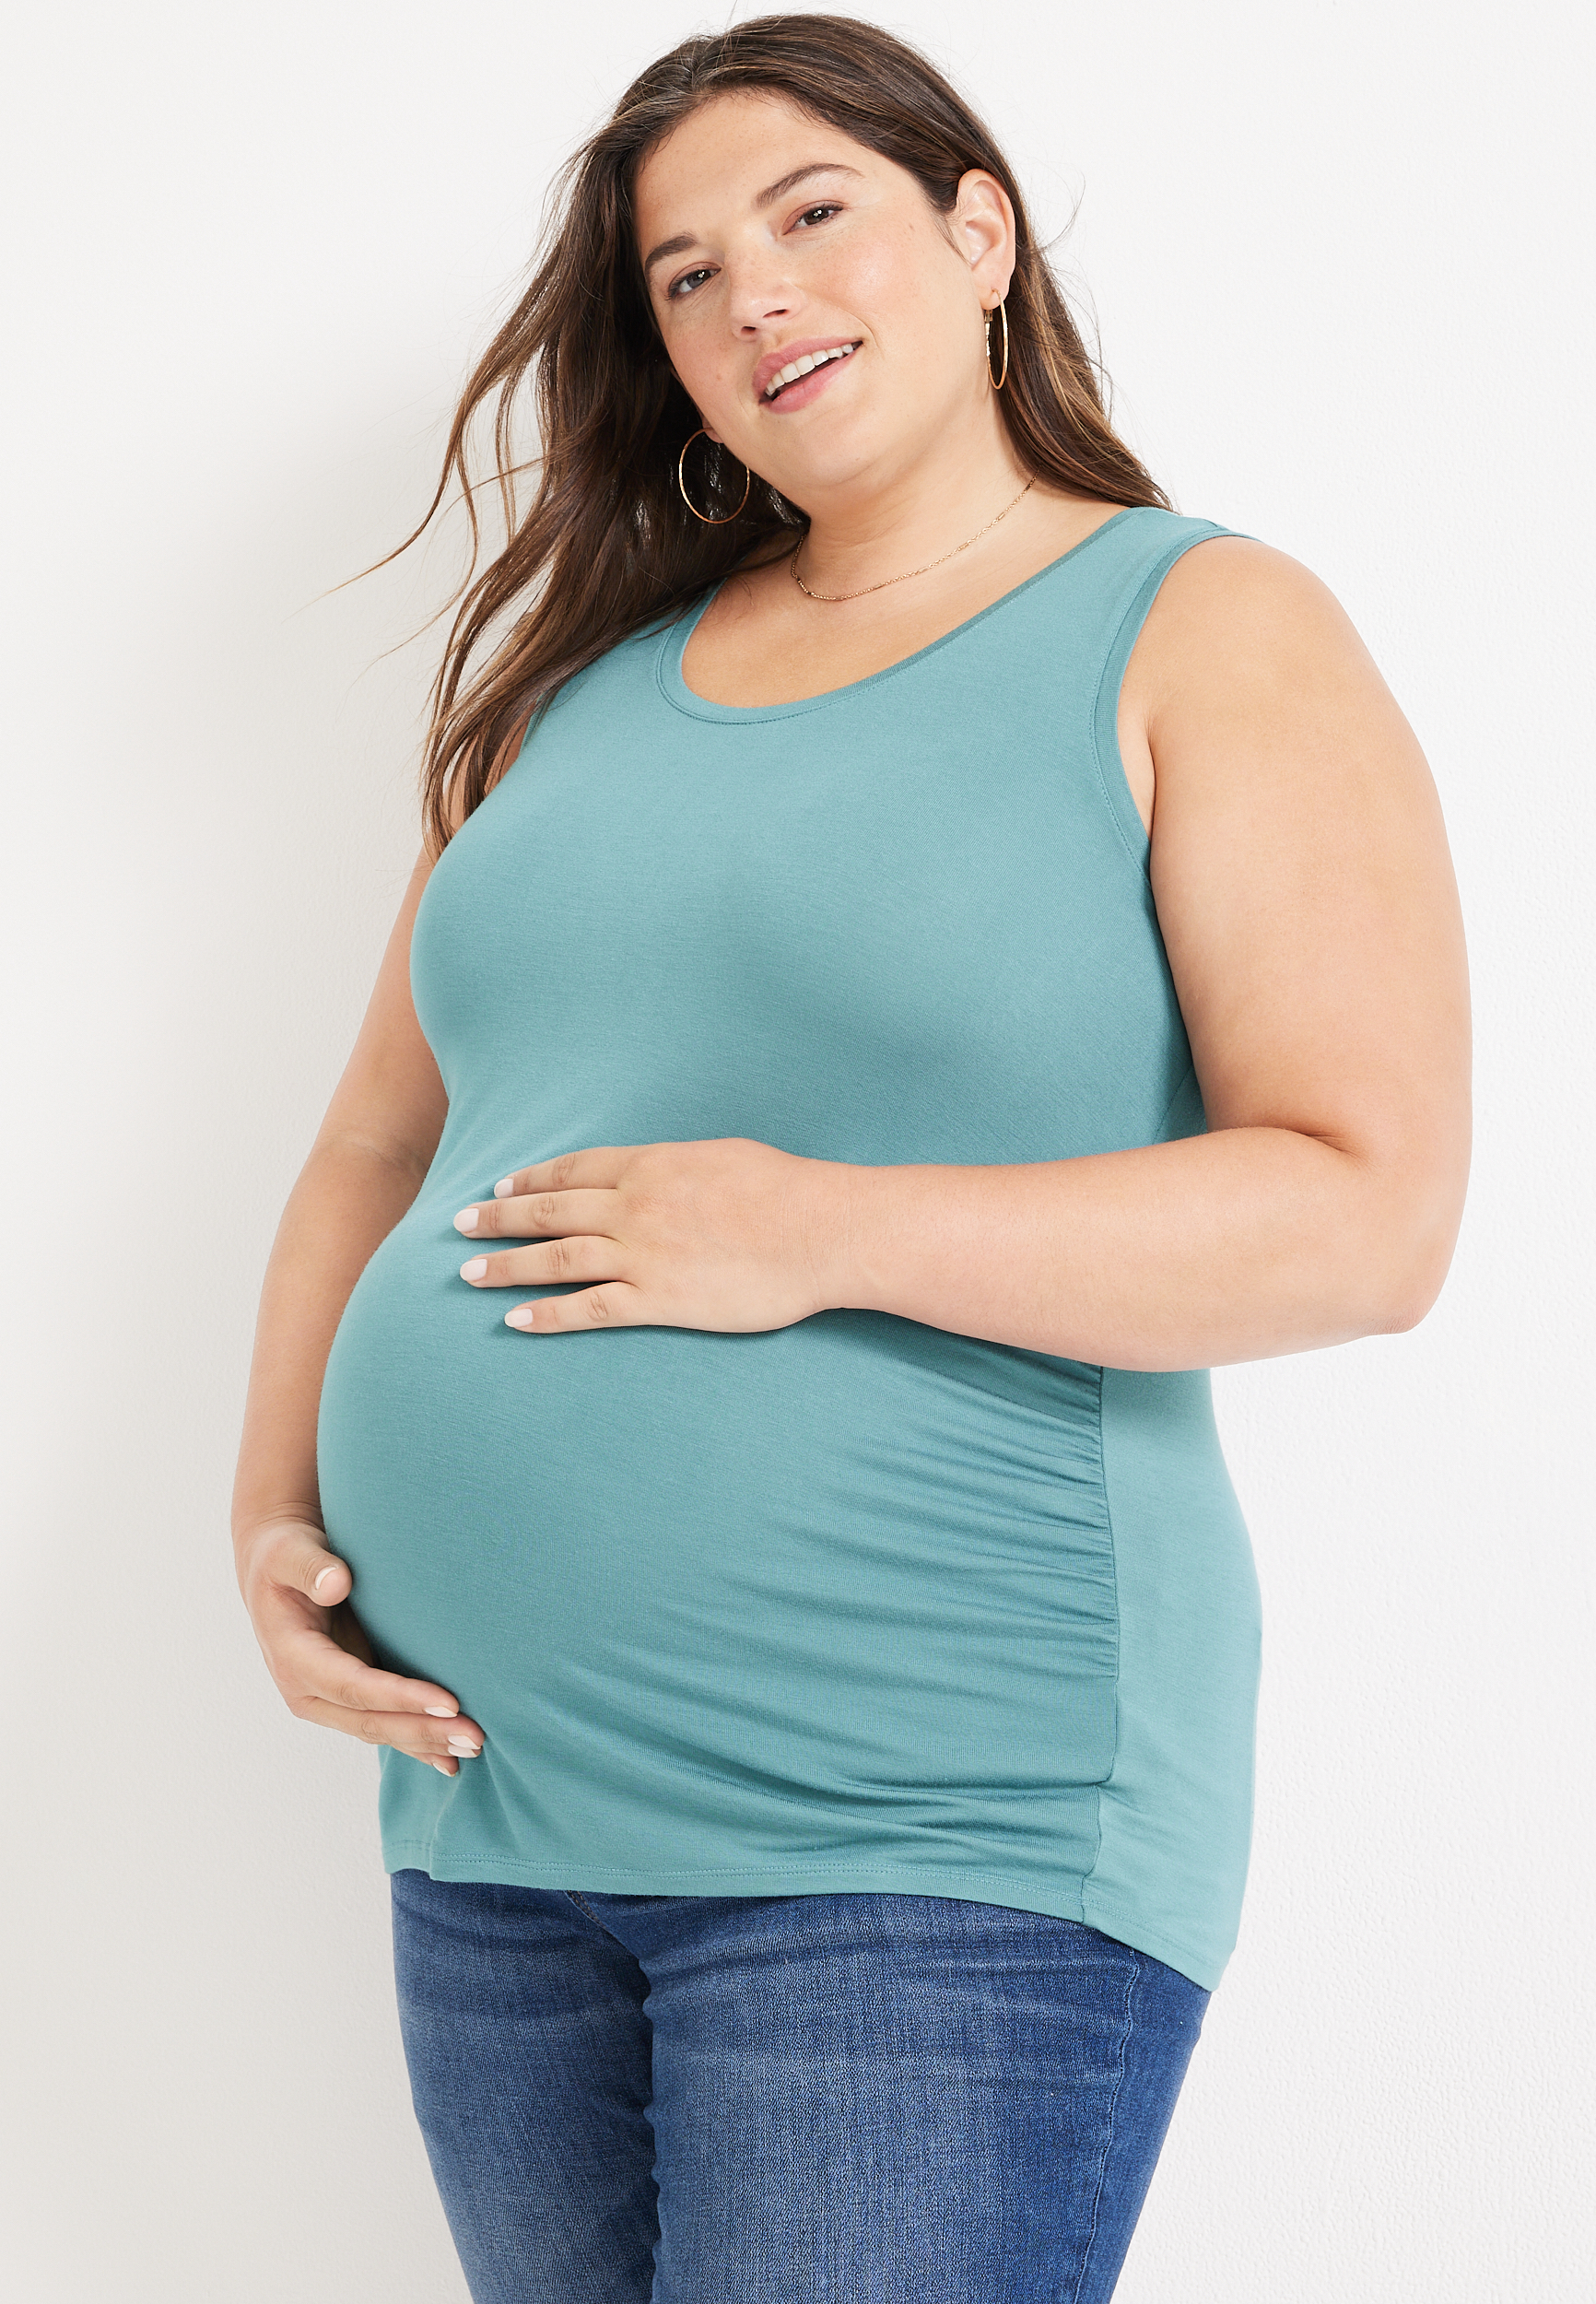 Super Plus Size Maternity Clothes [Size 3XL And Beyond]